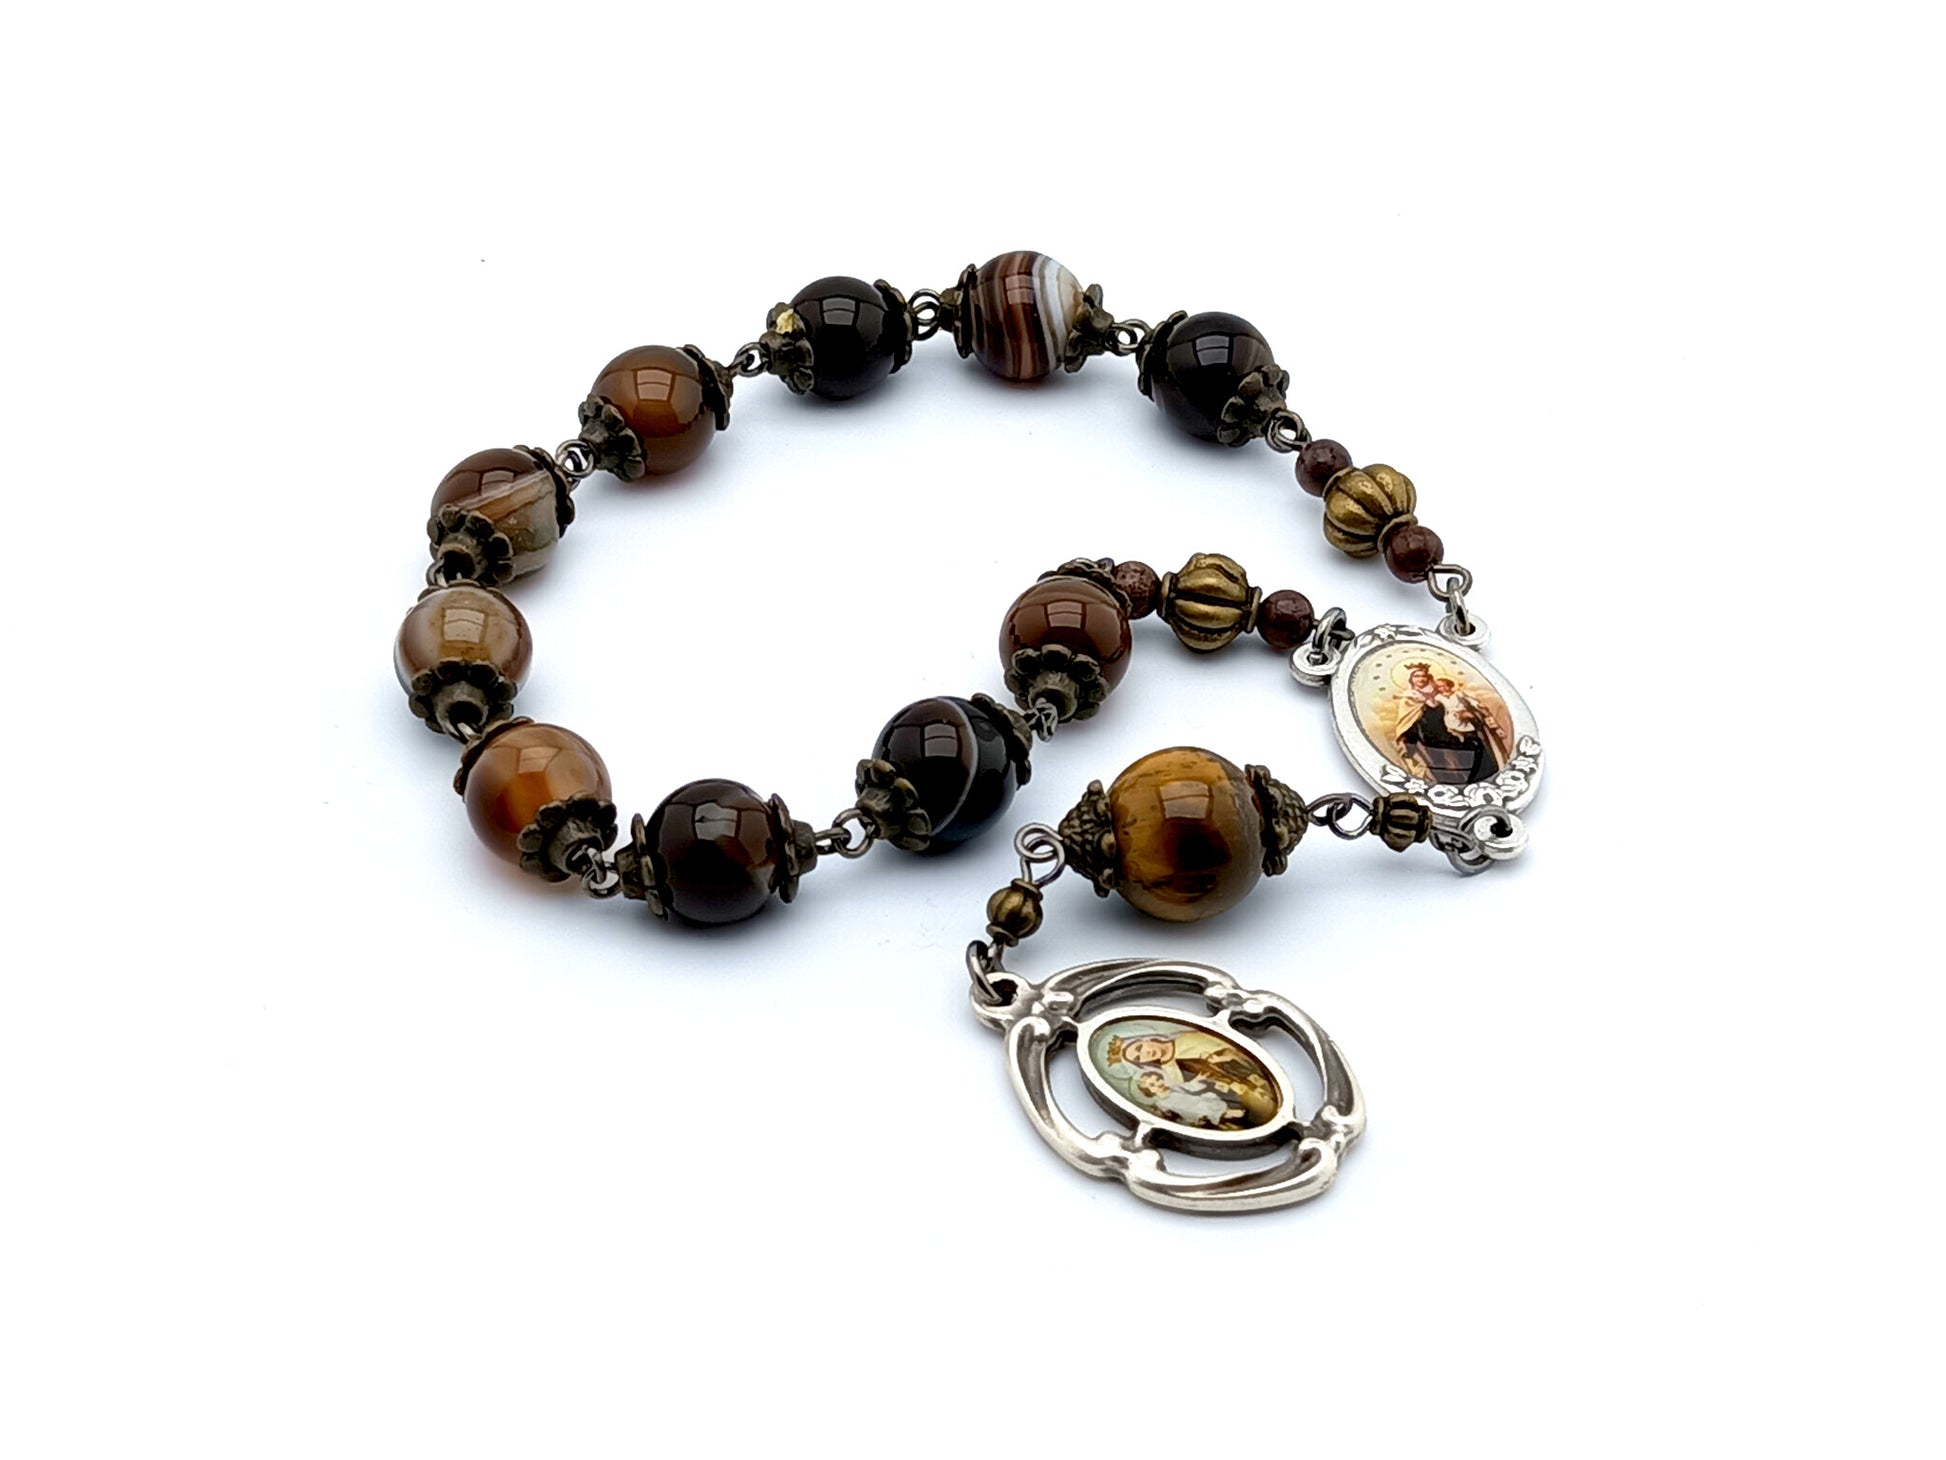 Our lady of Mount Carmel unique rosary beads single decade rosary with agate and tigers eye gemstone beads and silver centre and end medals.